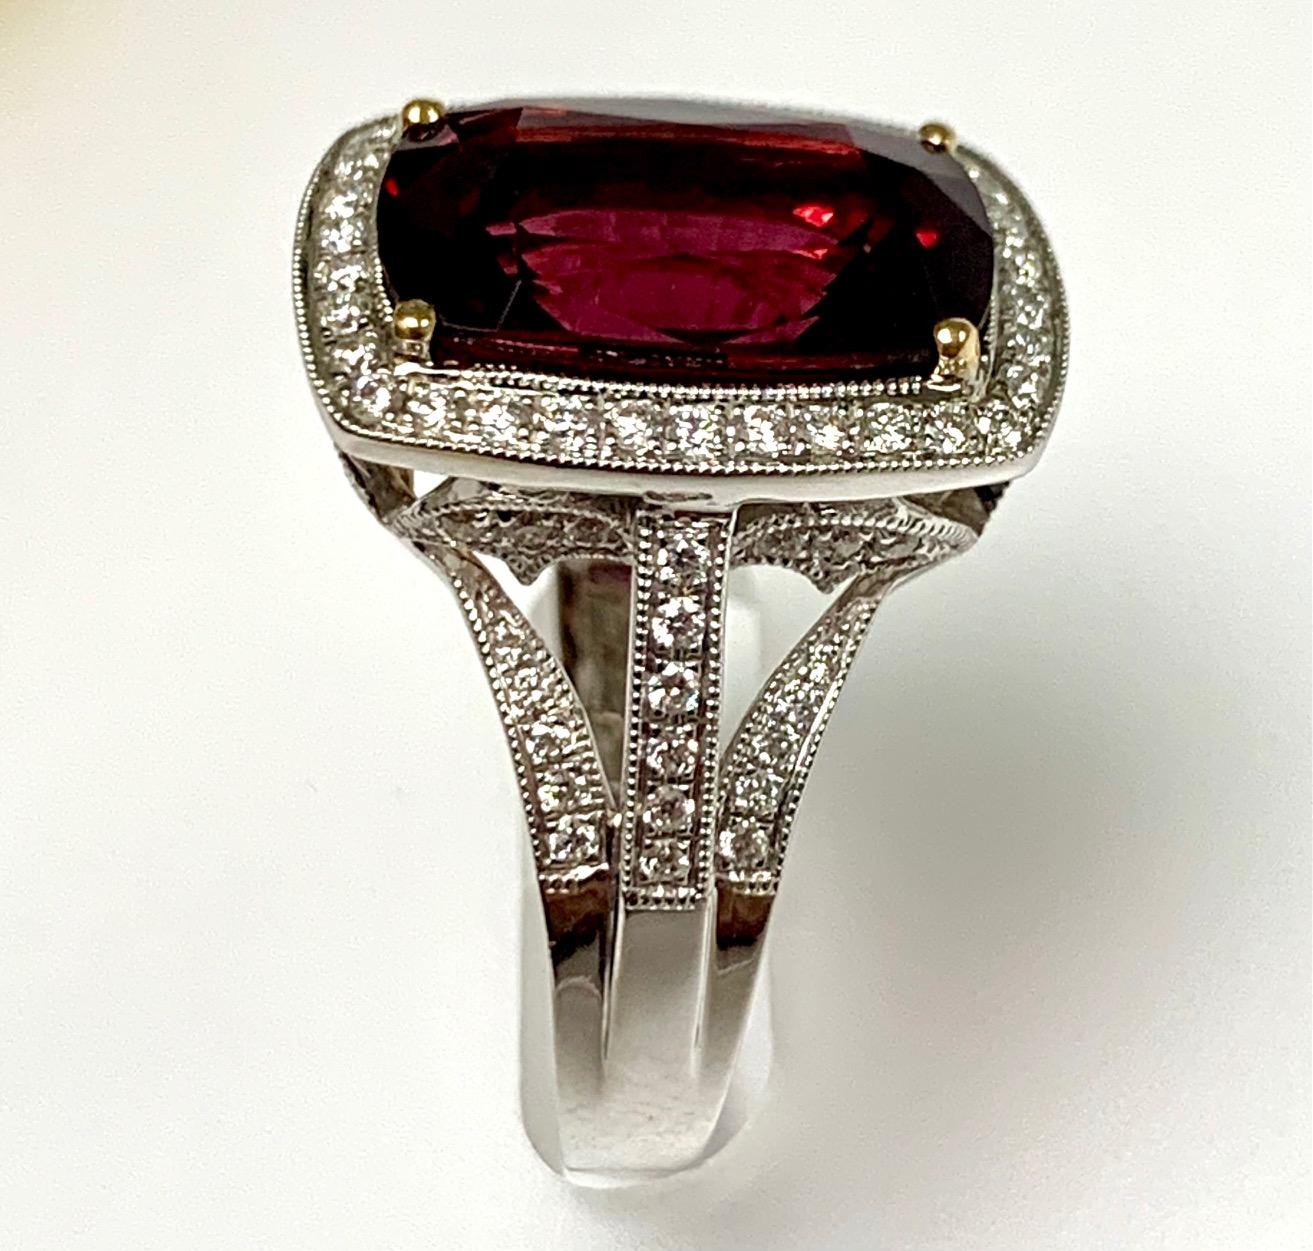 Cushion Cut 5.43 Carat Cushion Shape Red Spinel Diamonds Cocktail Ring For Sale